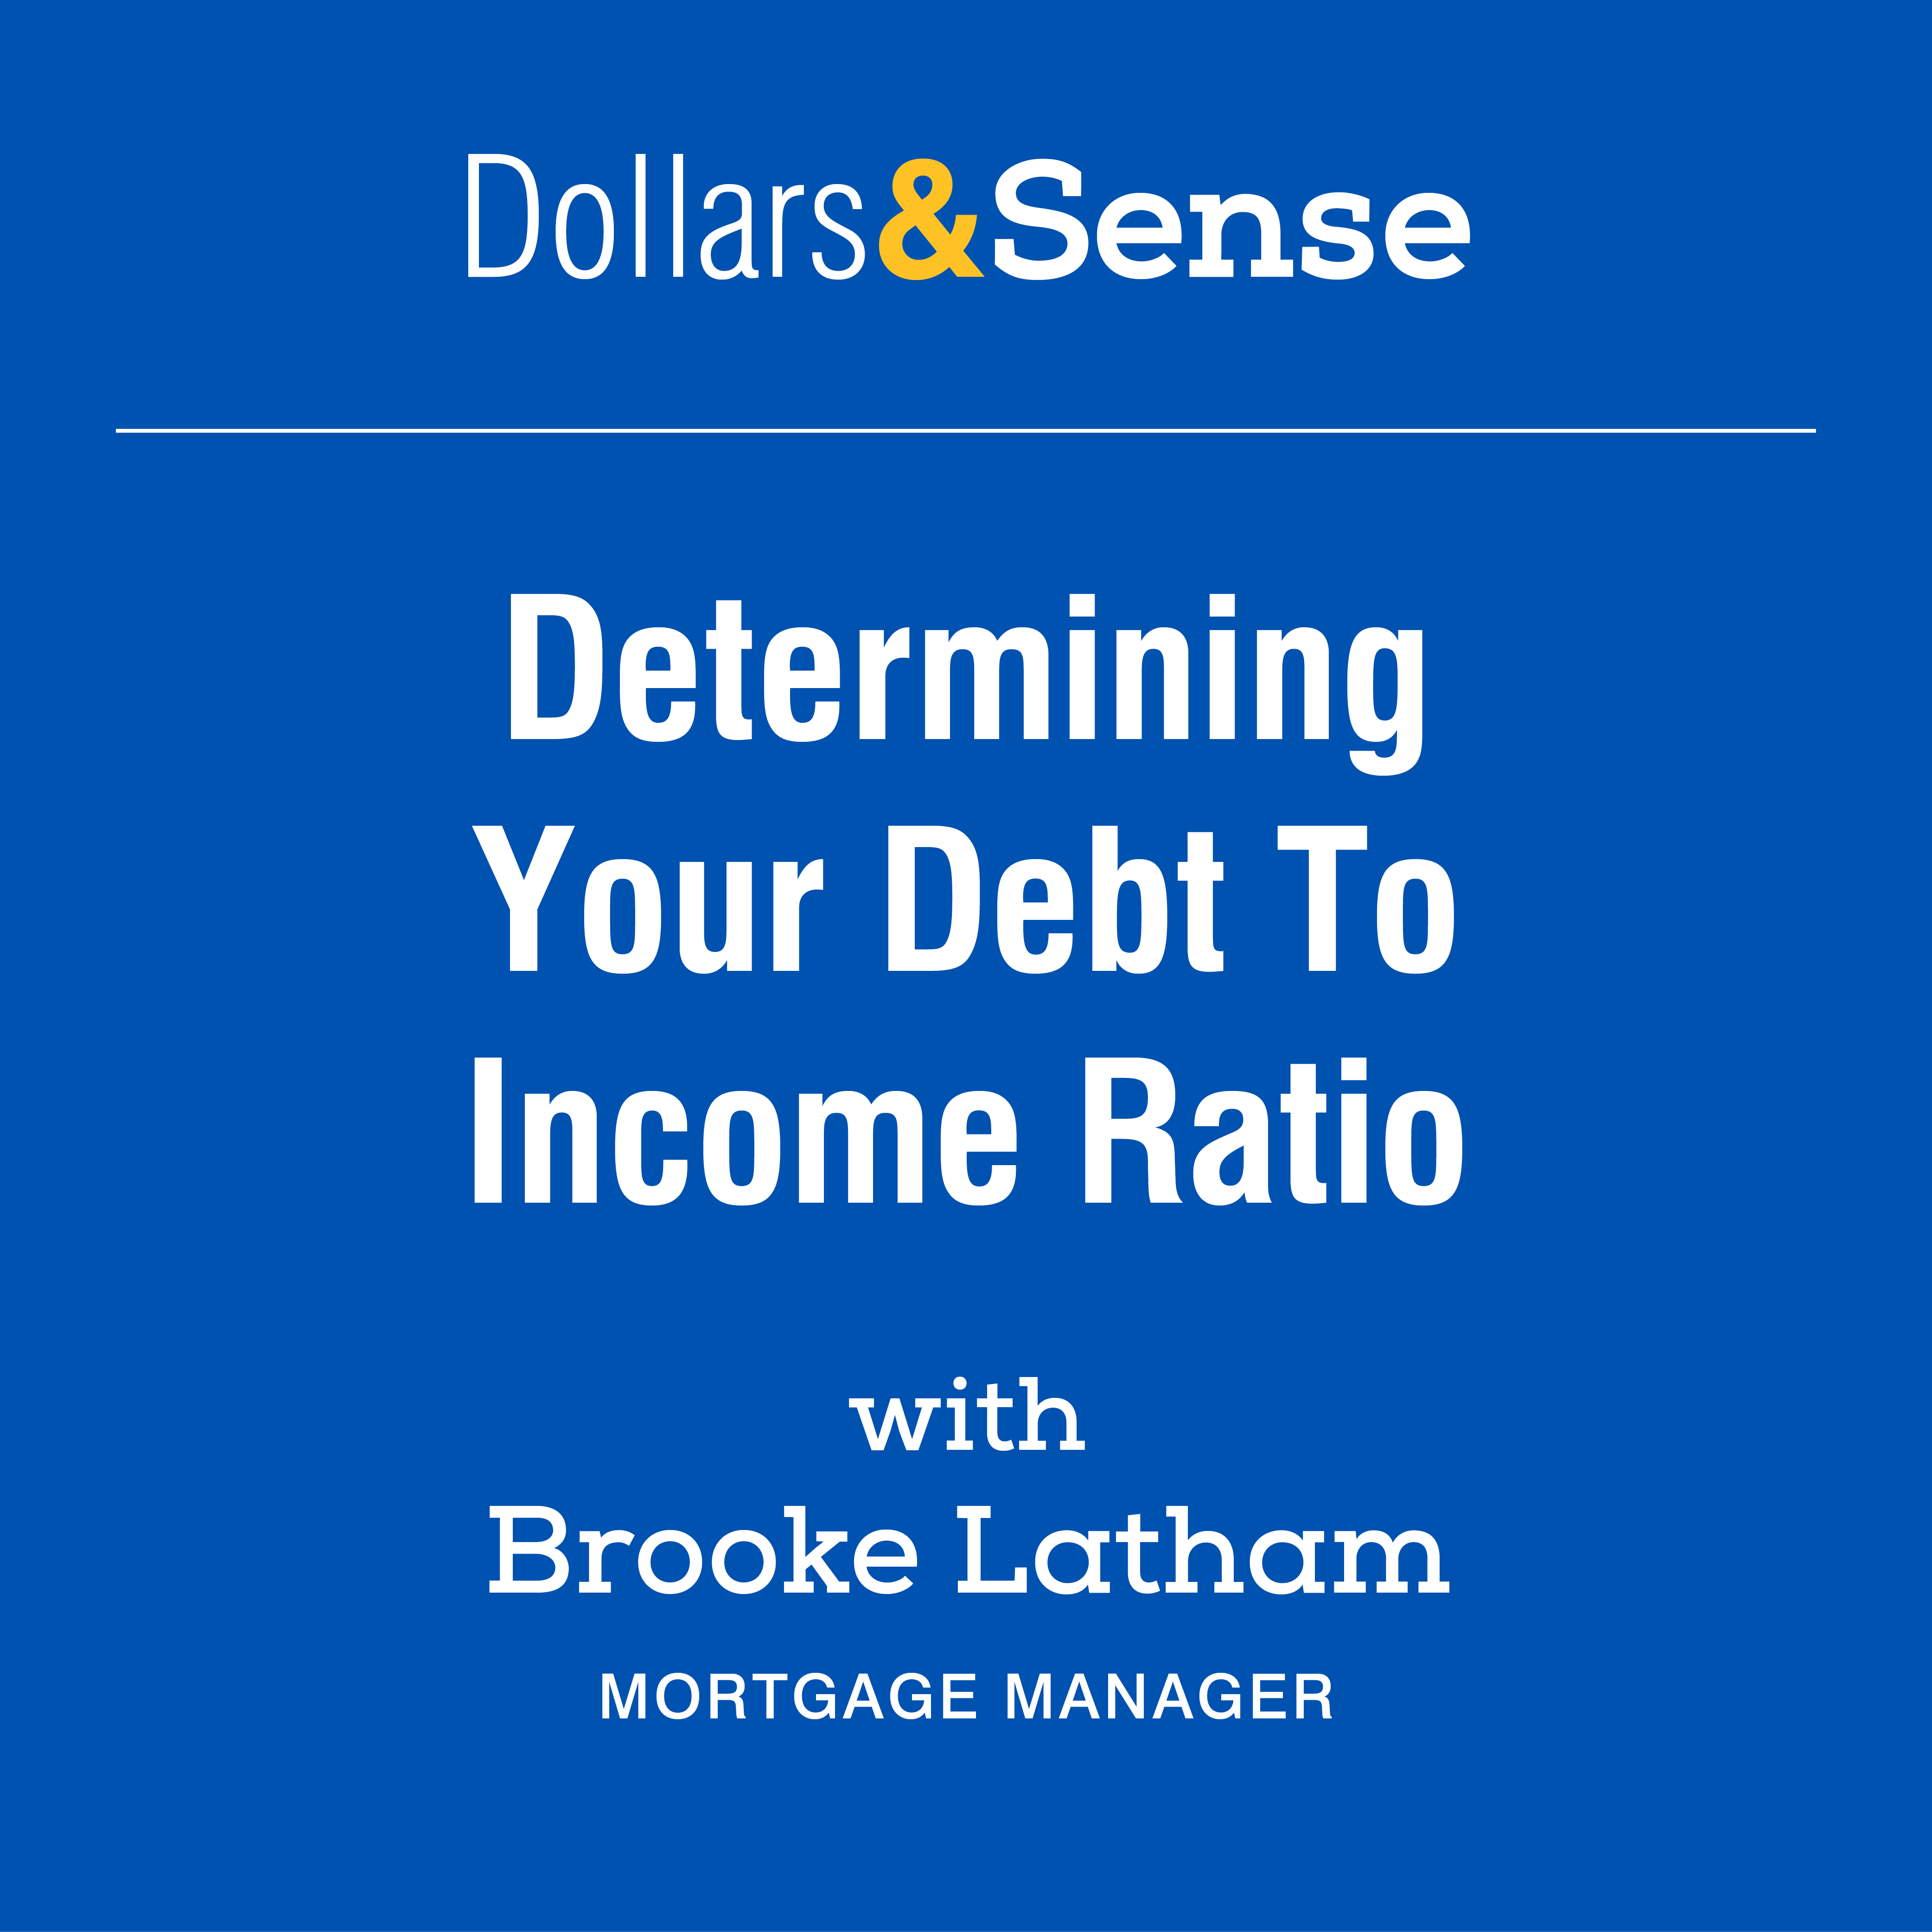 Dollars and Sense - Determining Your Debt to Income Ratio